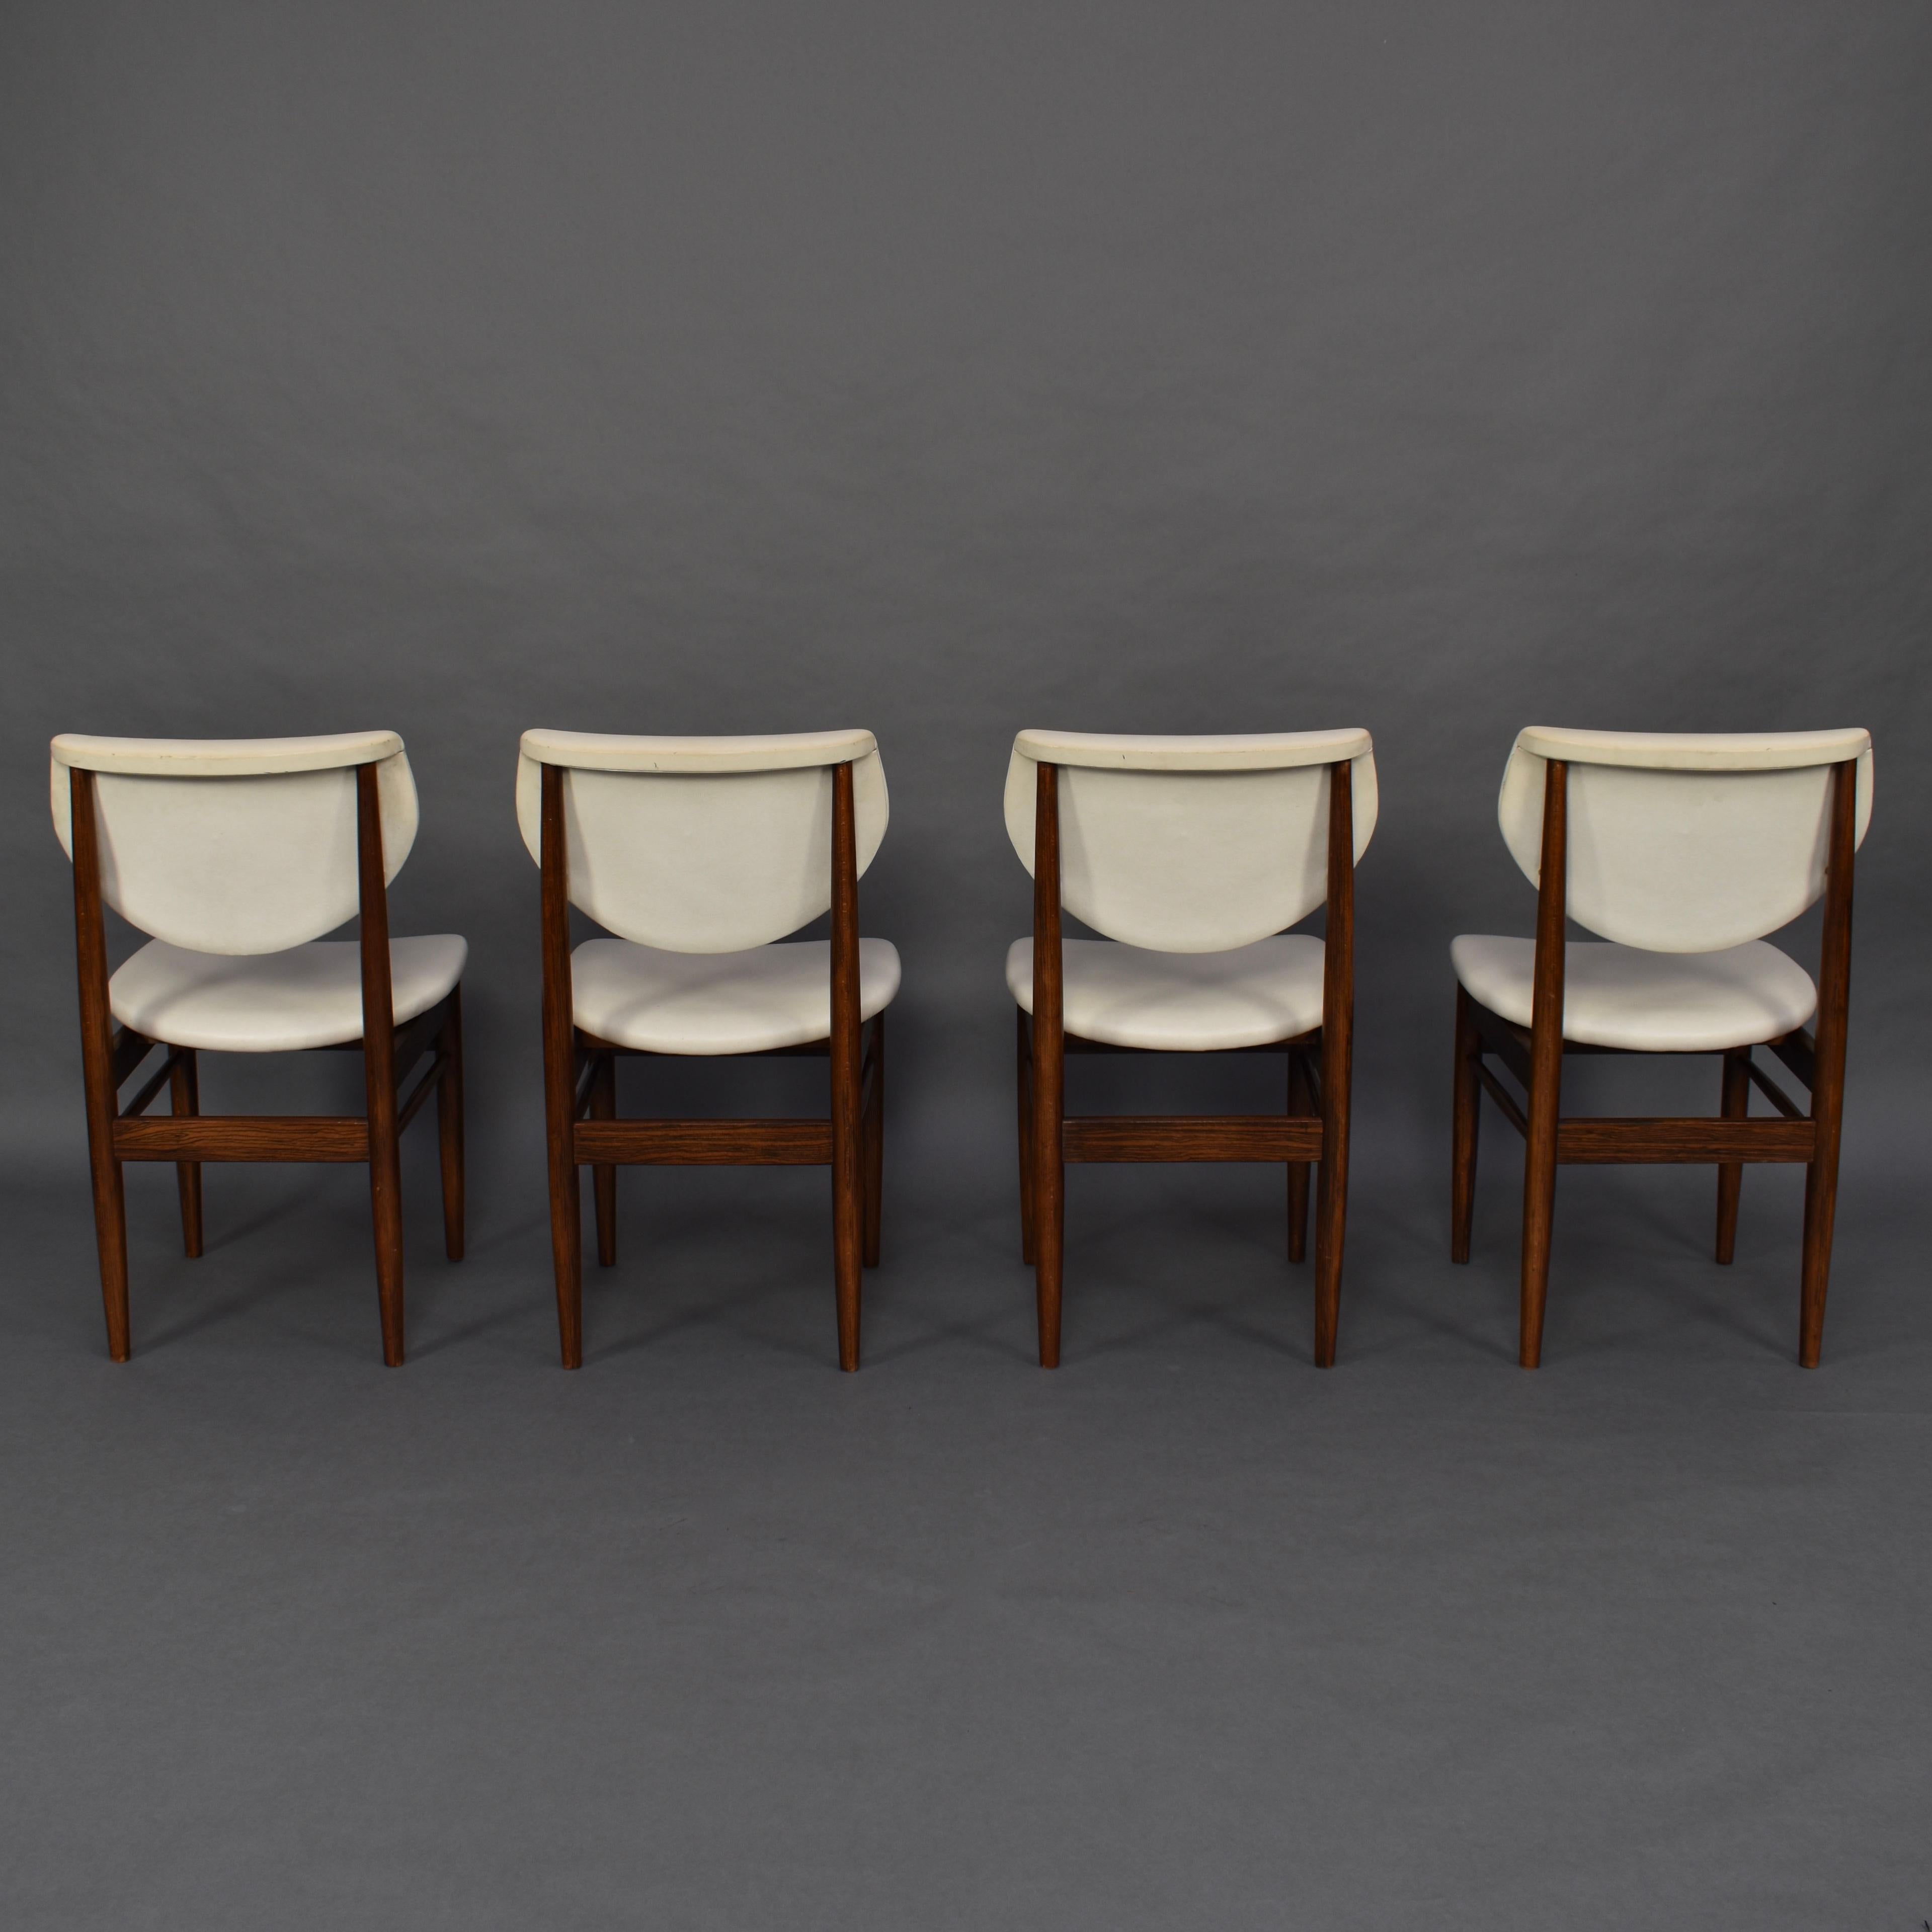 Scandinavian Modern Set of Four Wenge Dining Room Chairs, circa 1960 For Sale